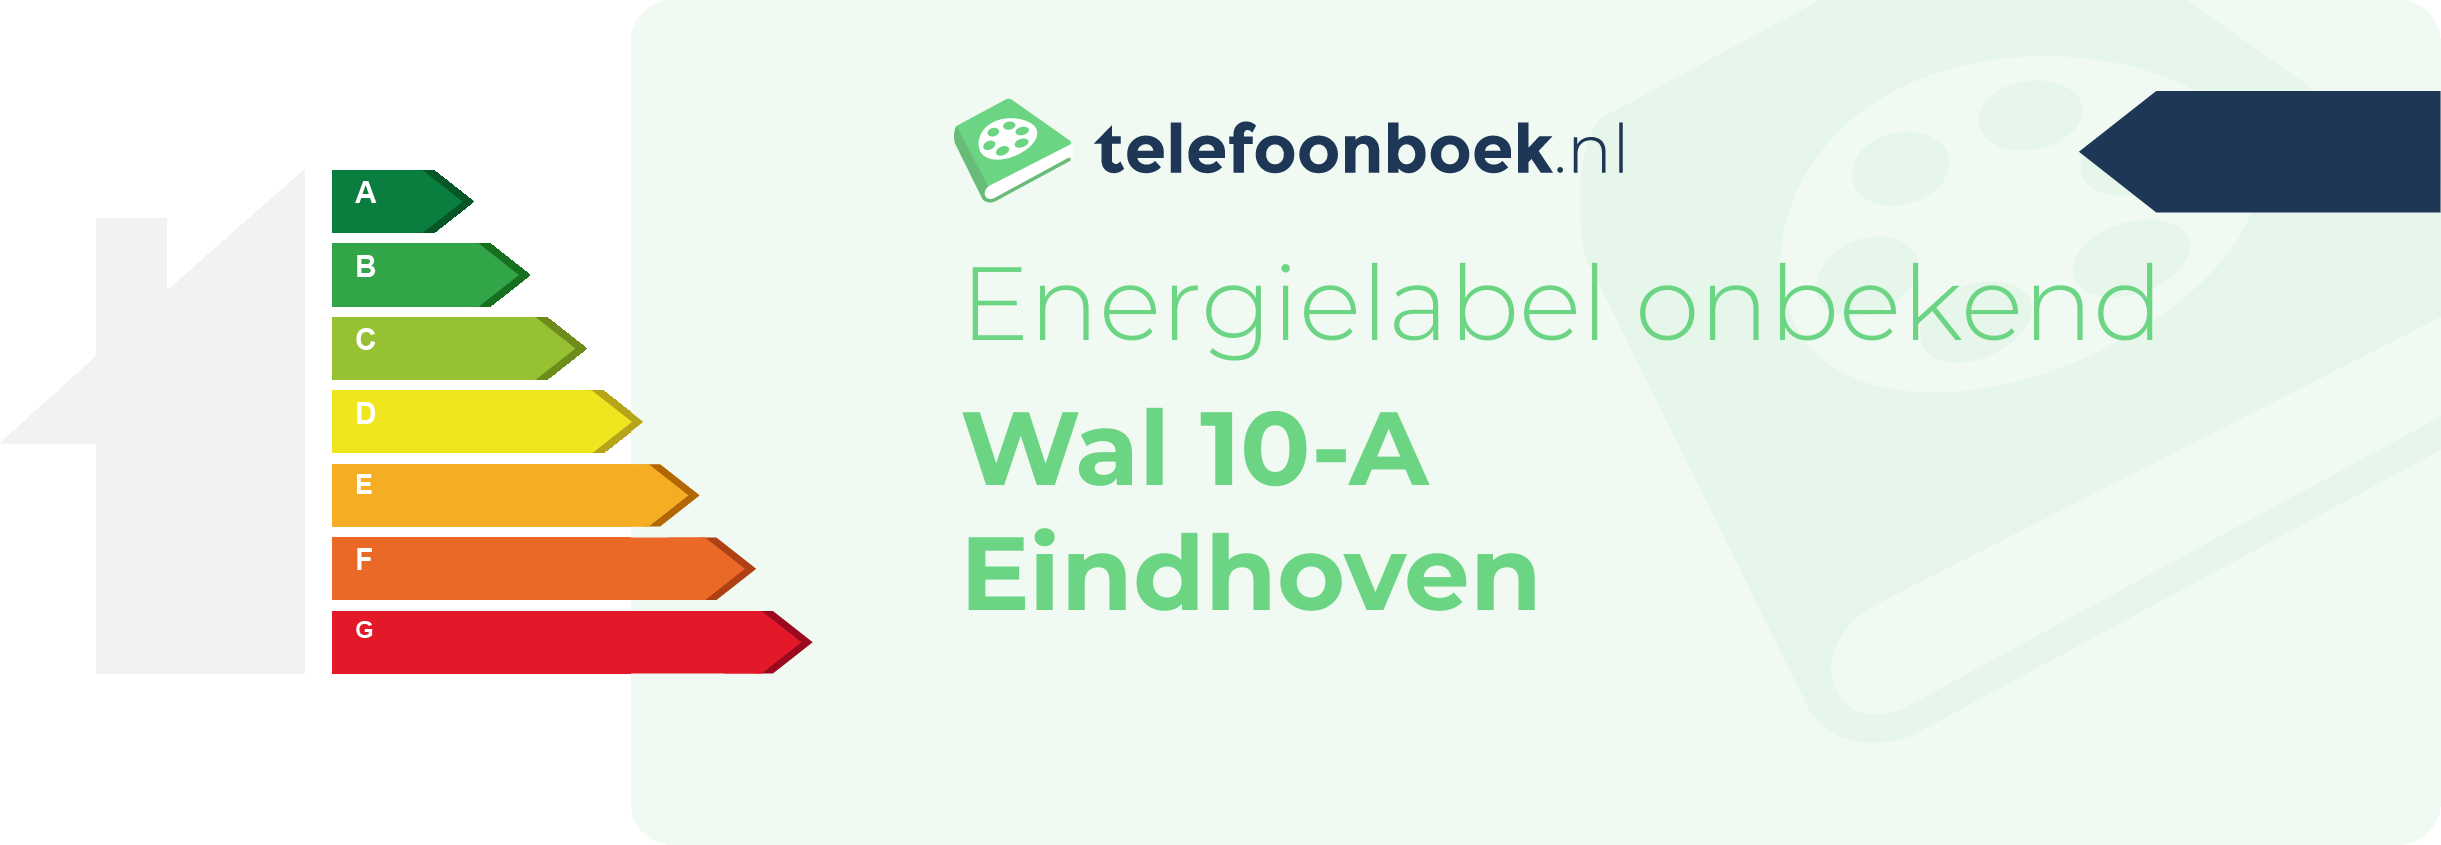 Energielabel Wal 10-A Eindhoven